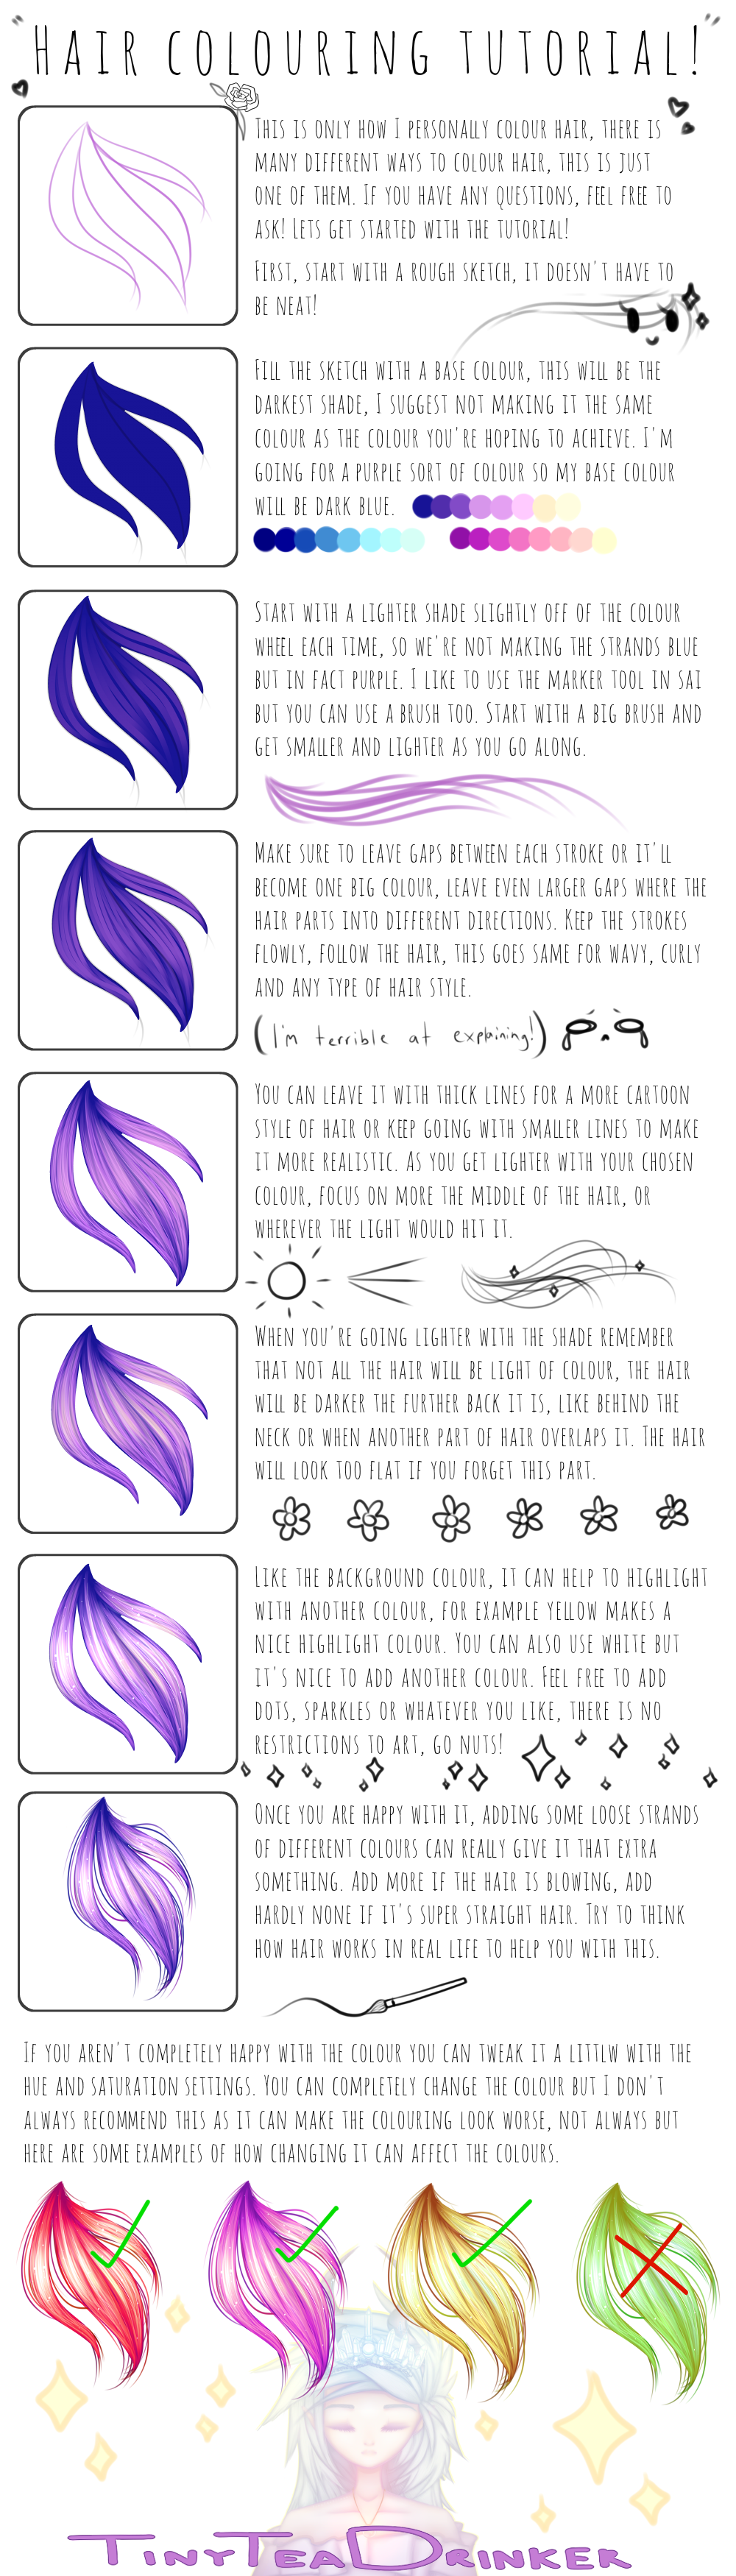 hair_colouring_tutorial_by_tinyteadrinker-daaceac.png